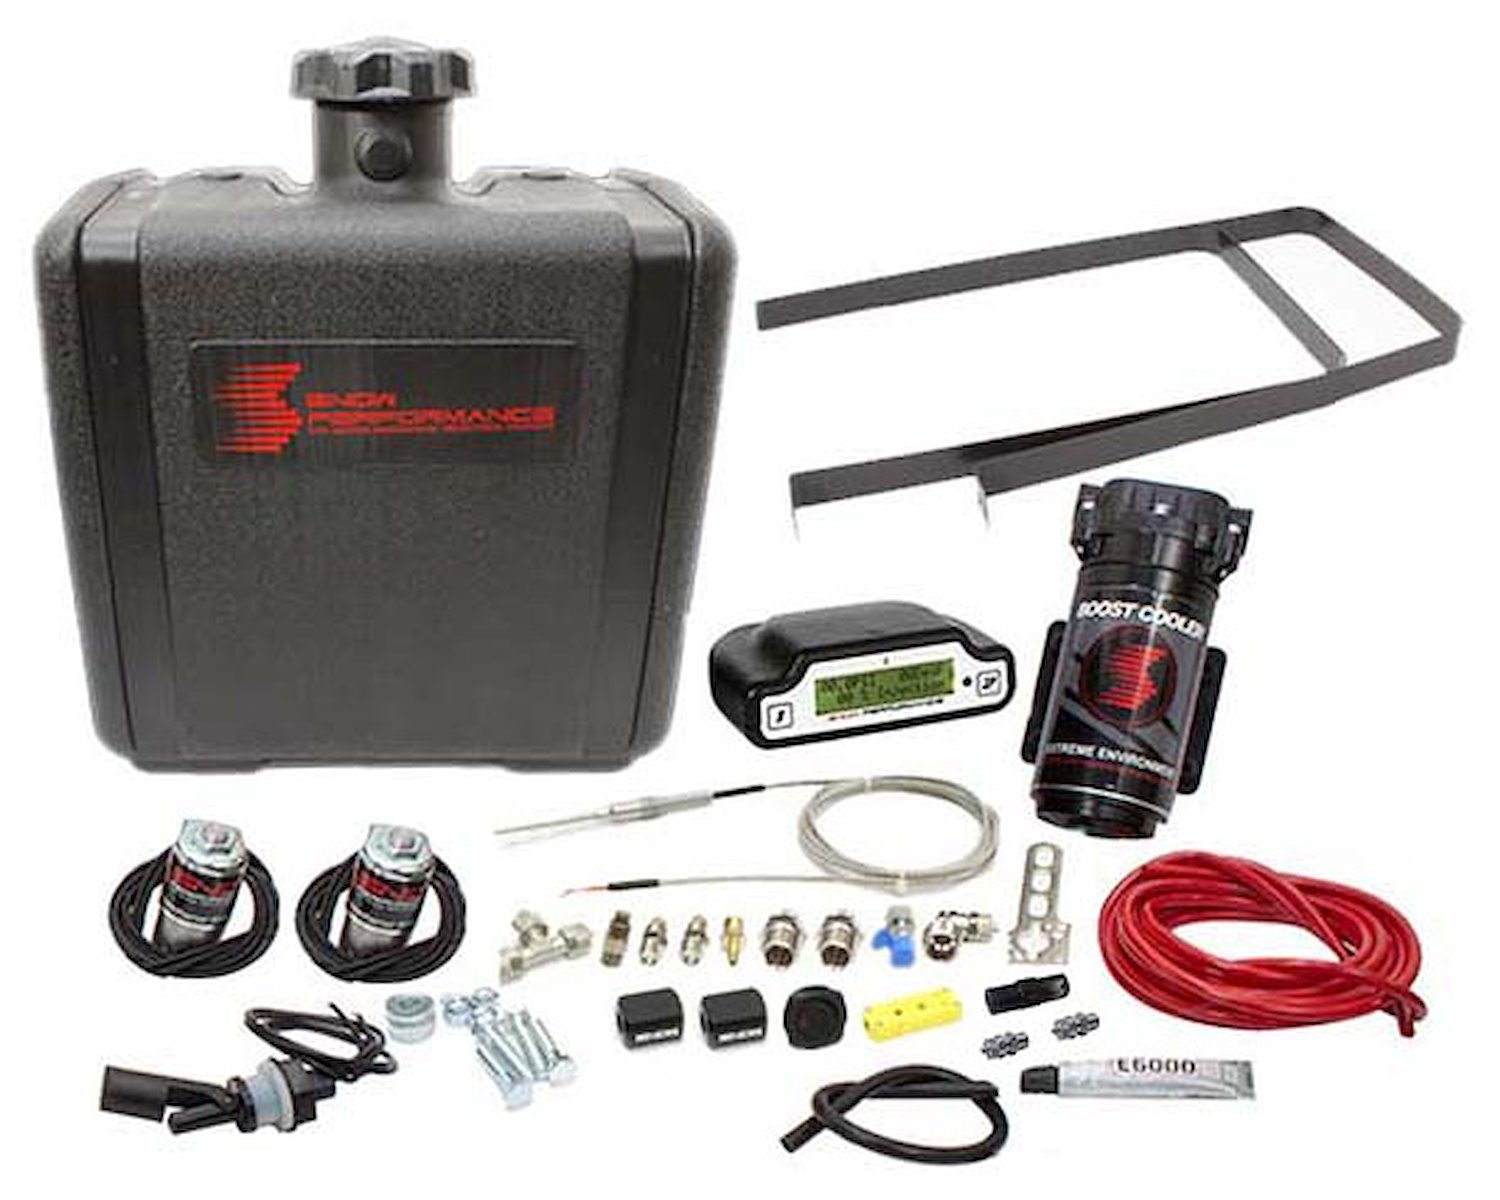 SNO-50100 Diesel Stage-3 Boost Cooler Water-Methanol Injection Kit, with Tank